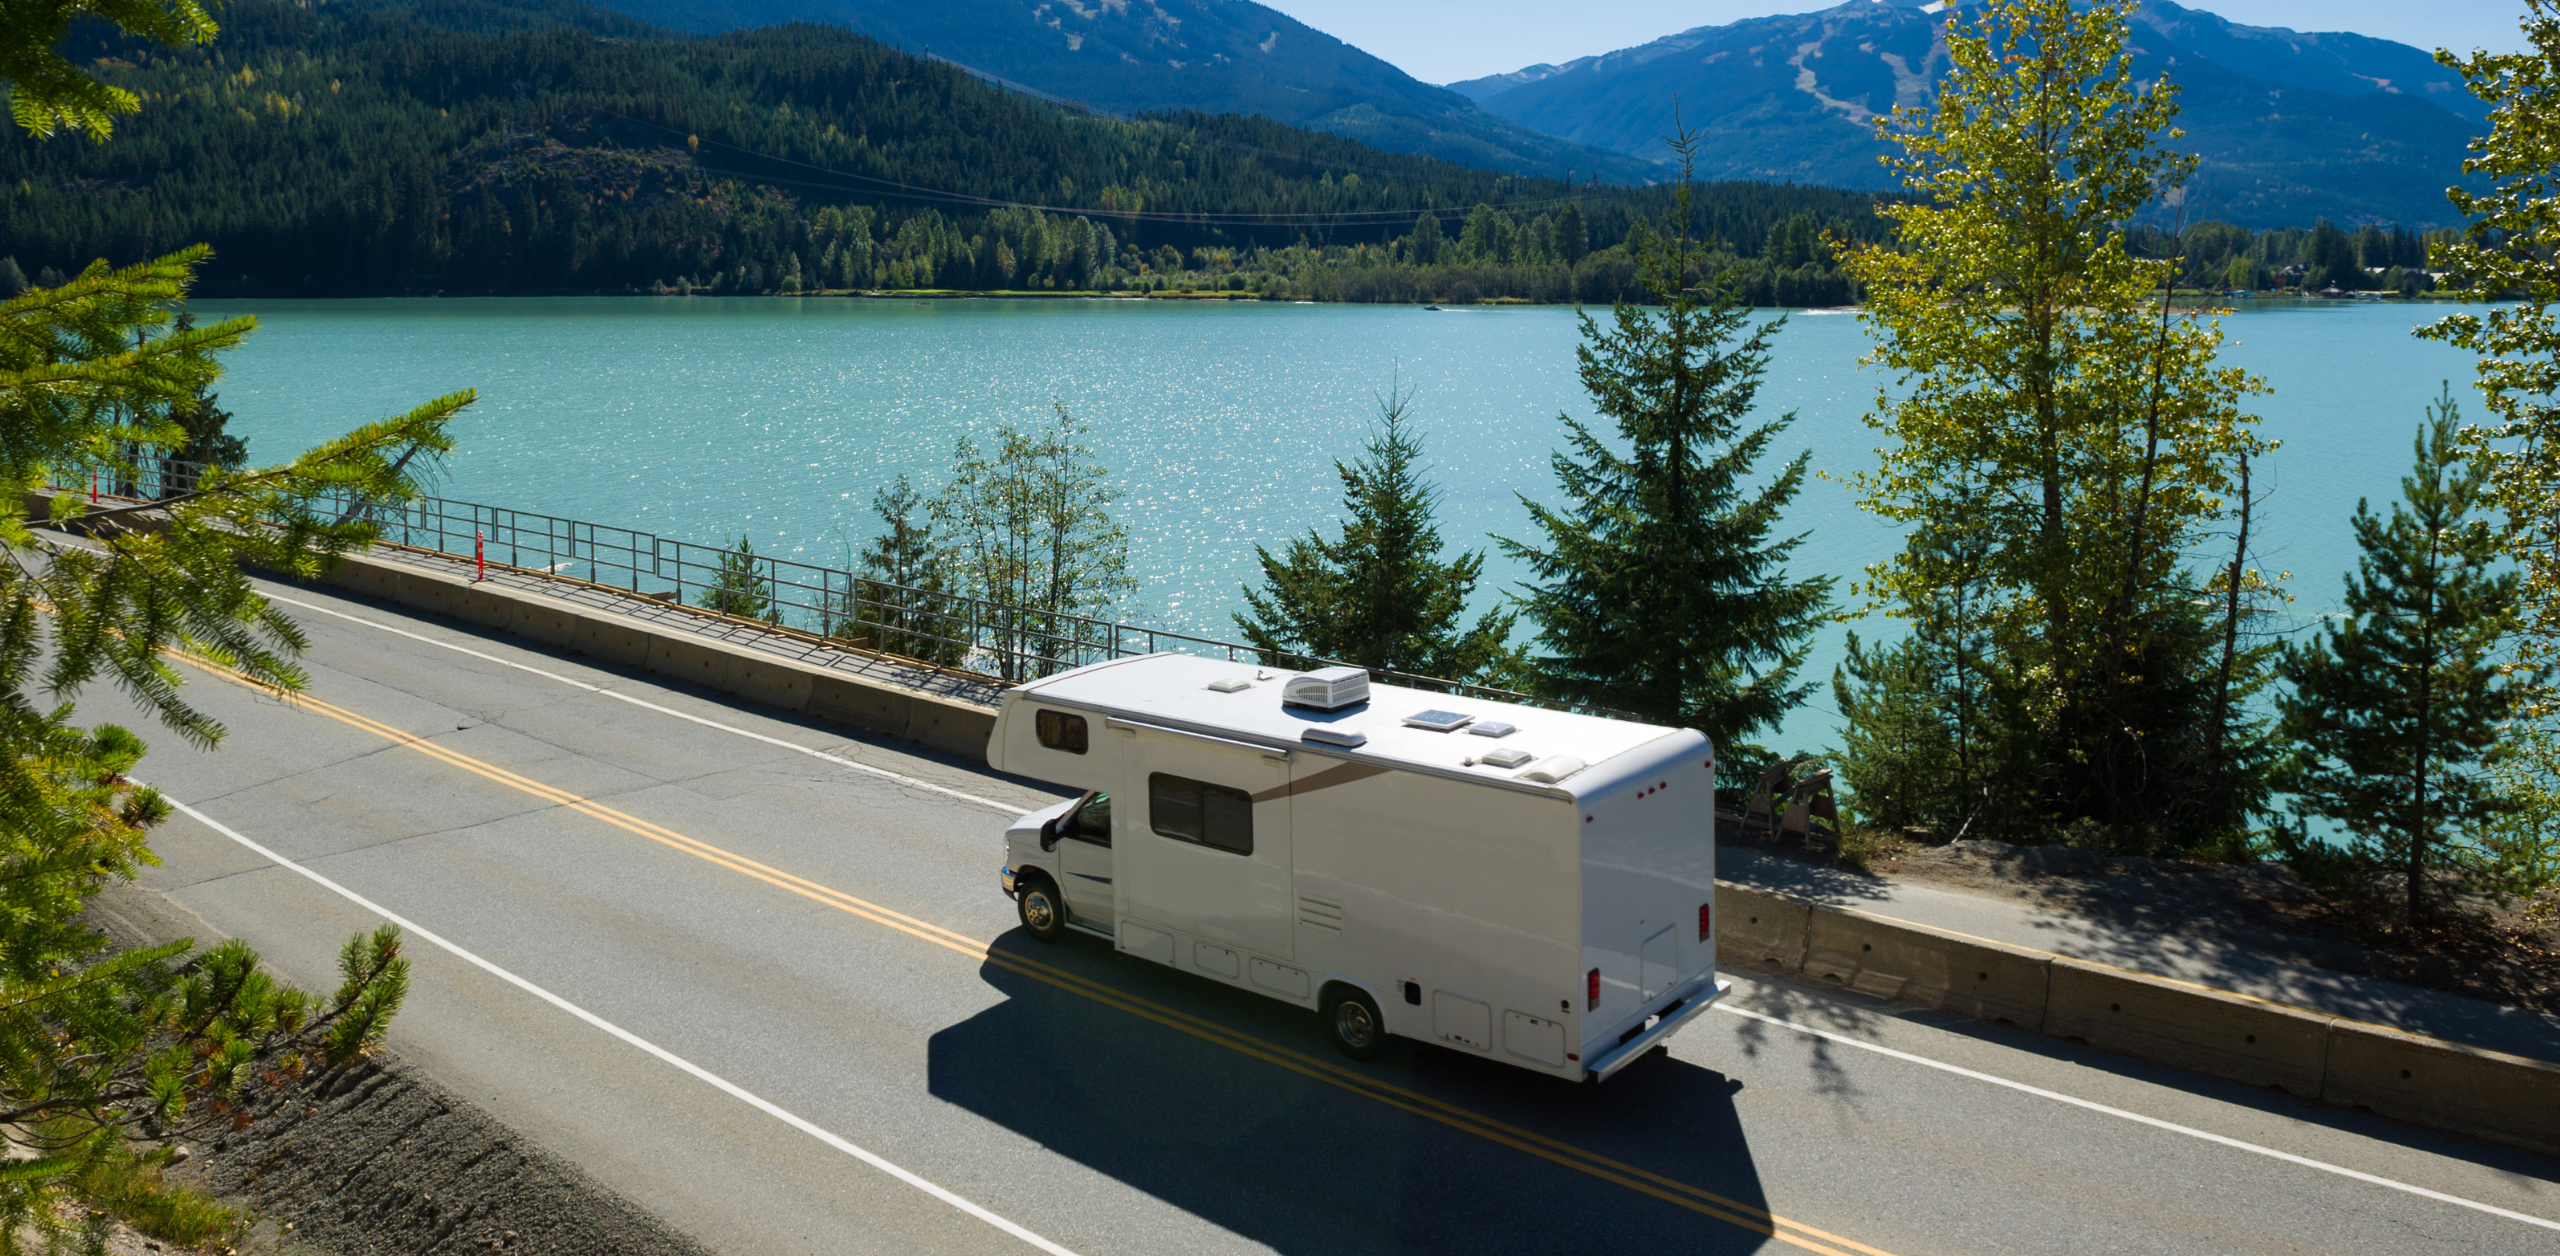 Are RVs Safe for Kids?